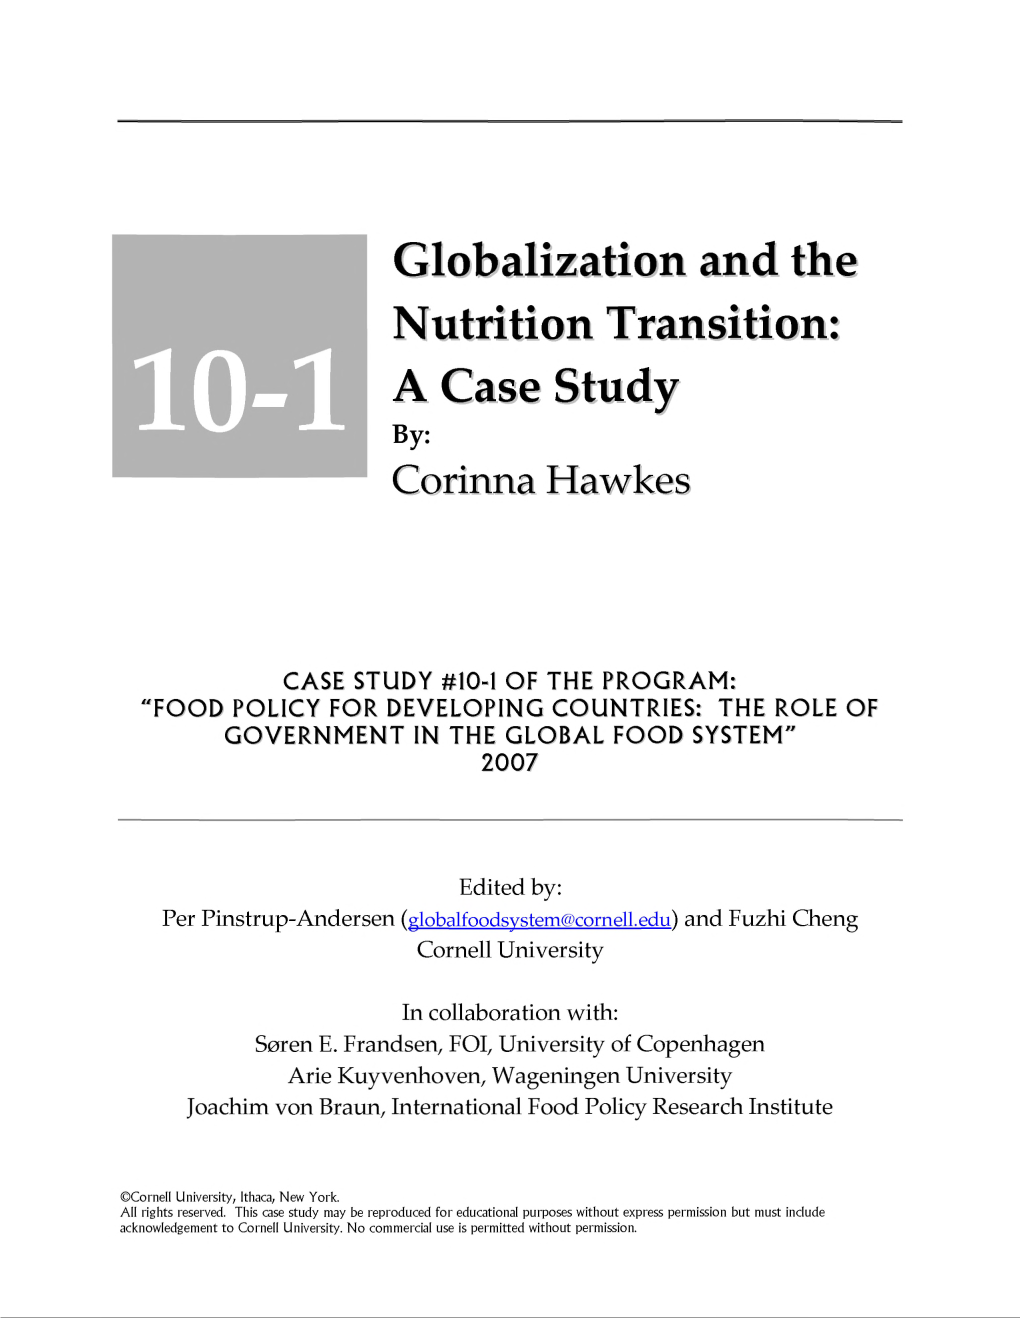 Globalization and the Nutrition Transition: a Case Study 10-1 By: Corinna Hawkes